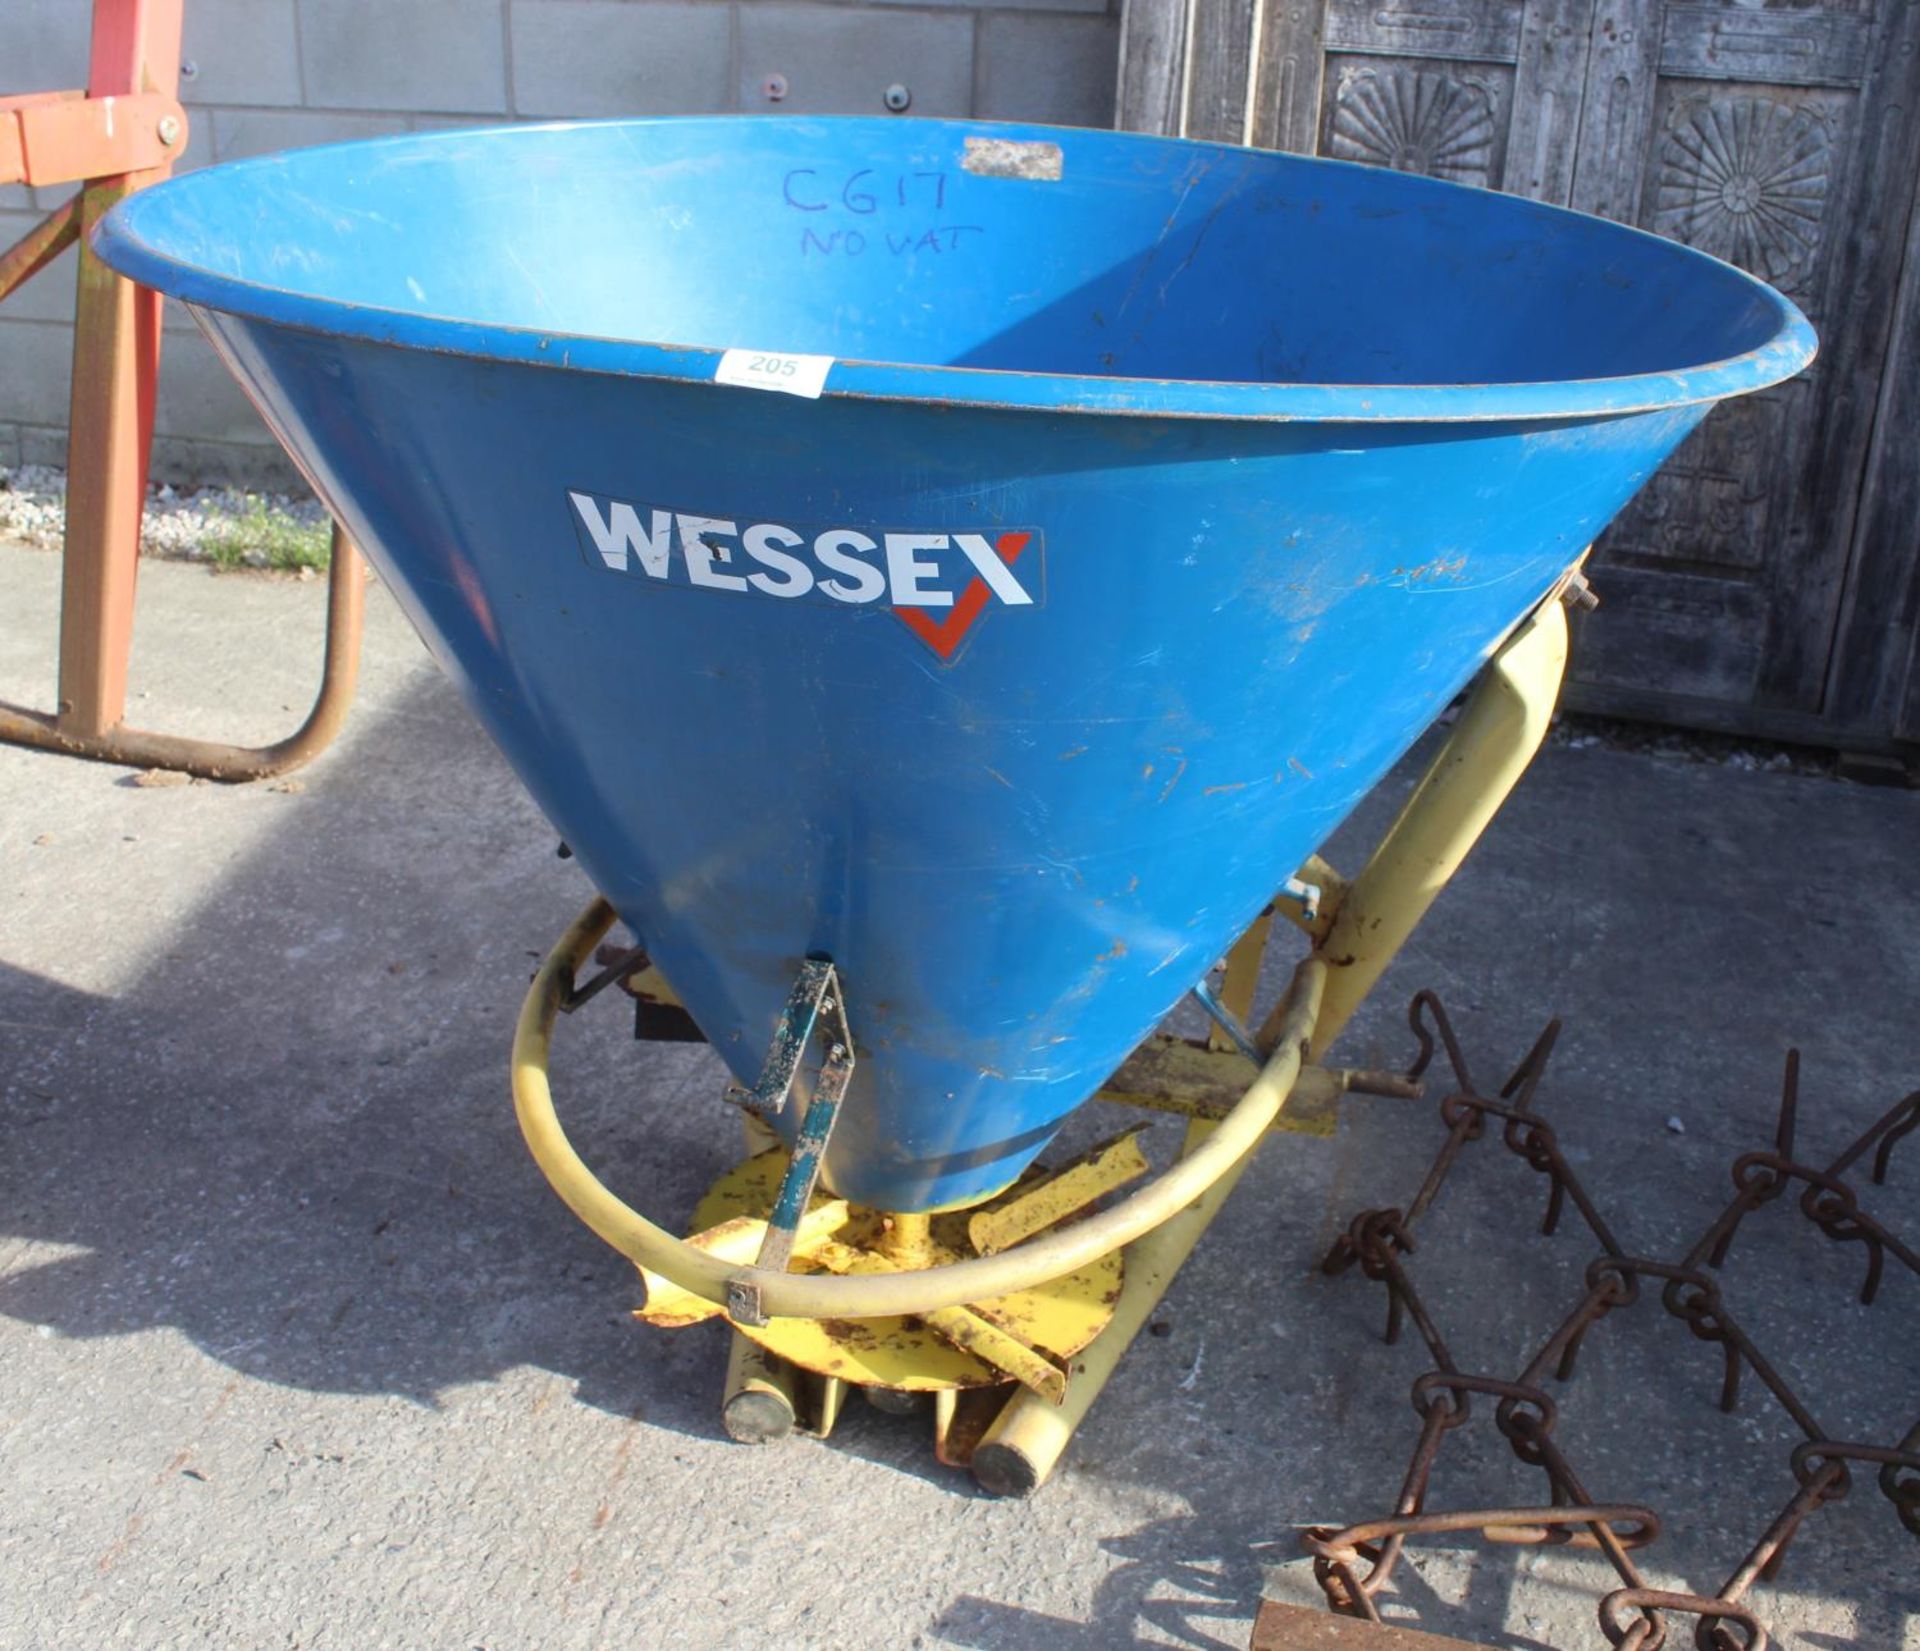 A WESSEX COMPACT TRACTOR FERT SPINNER PTO IN THE PAY OFFICE NO VAT